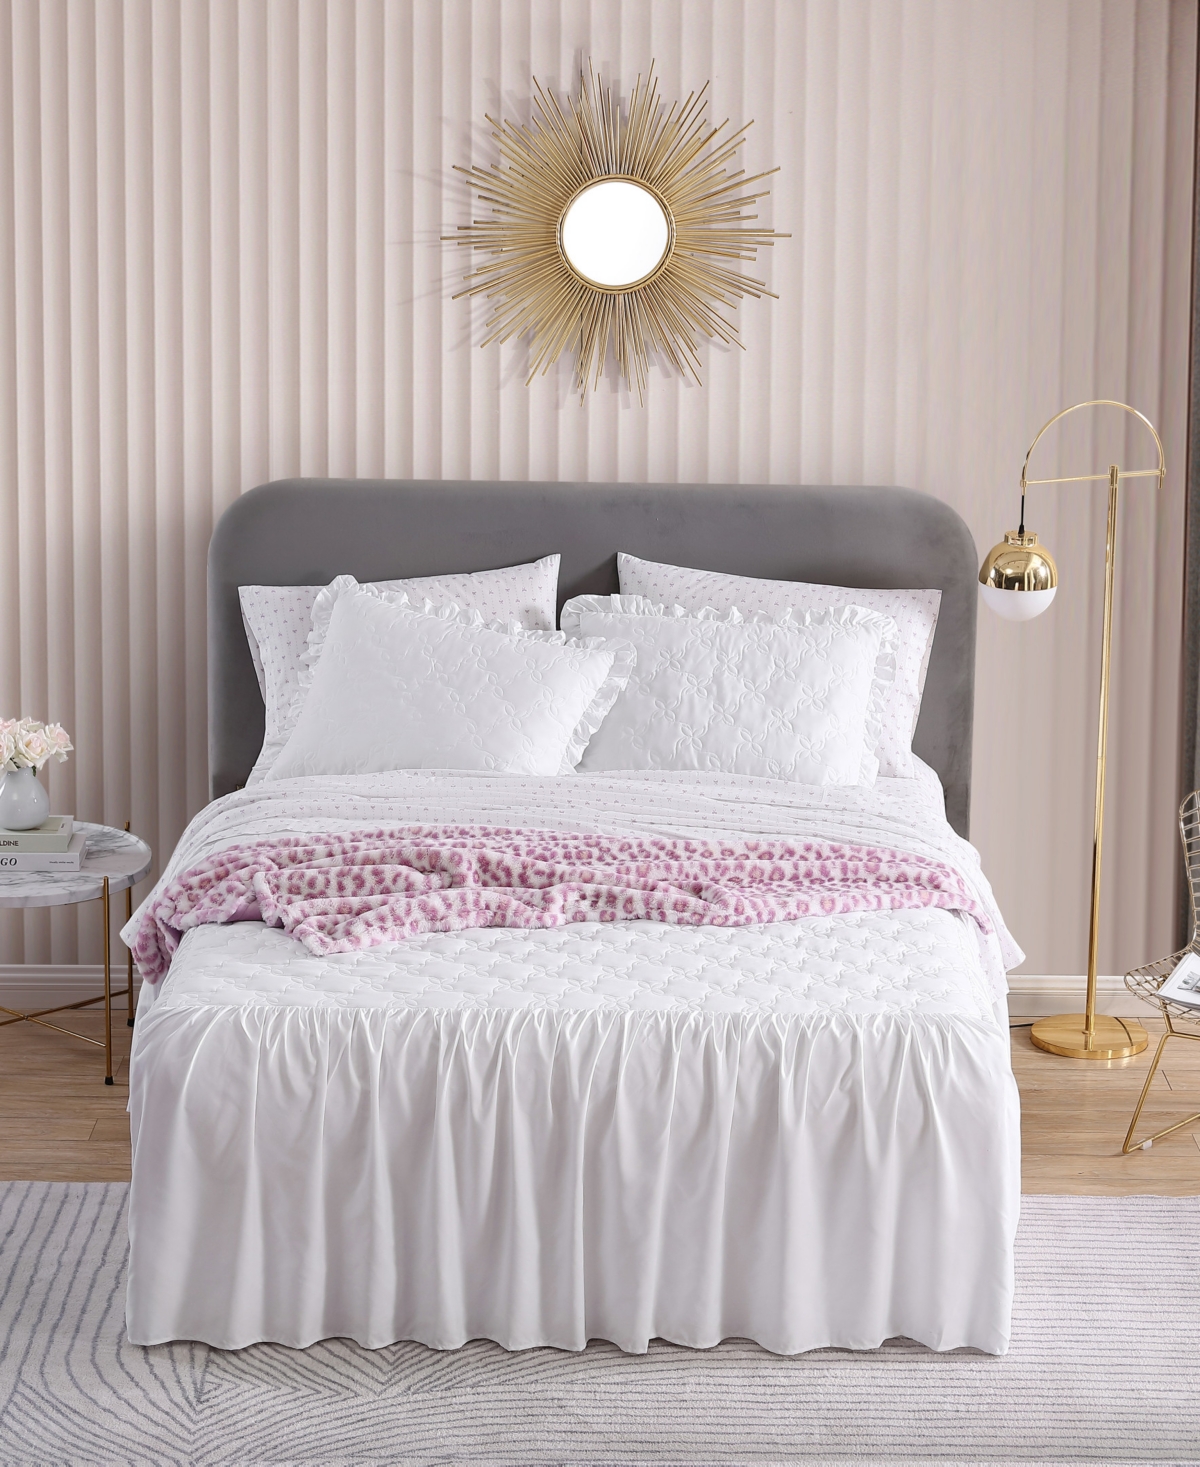 Betsey Johnson 2 Piece Solid Microfiber Bedspread Set, Twin Bedding In White